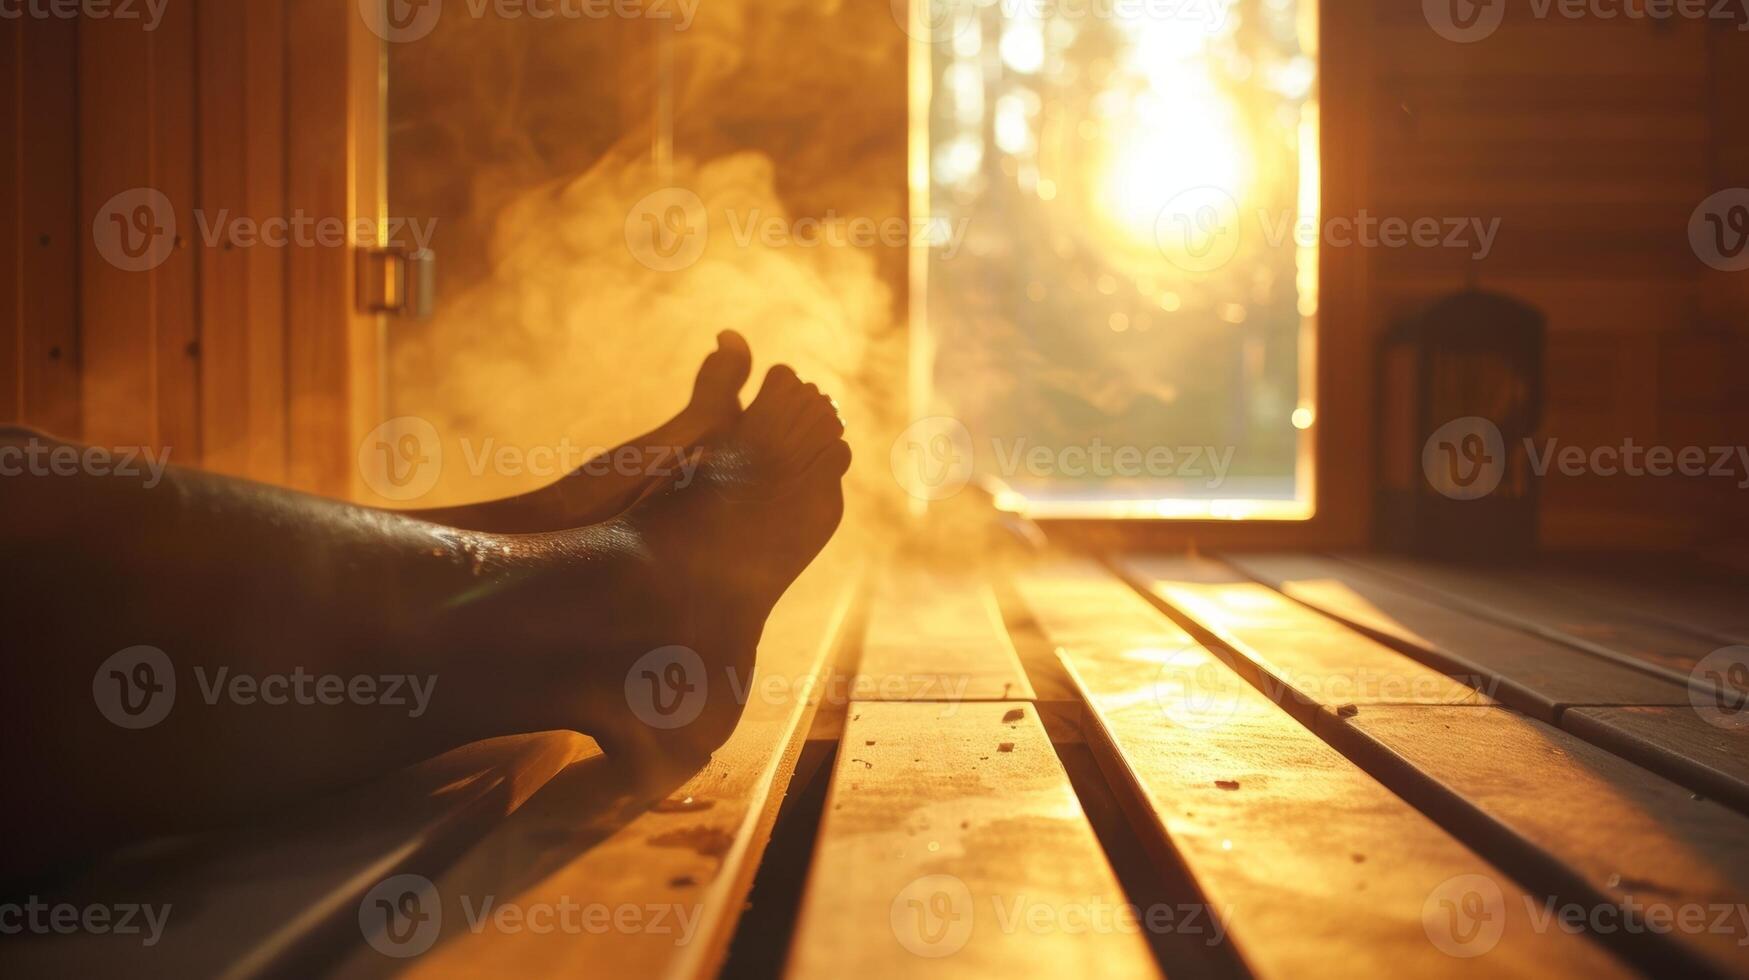 A person stretching out their limbs in the heat of the sauna finding relief from any tightness or stiffness in their muscles. photo